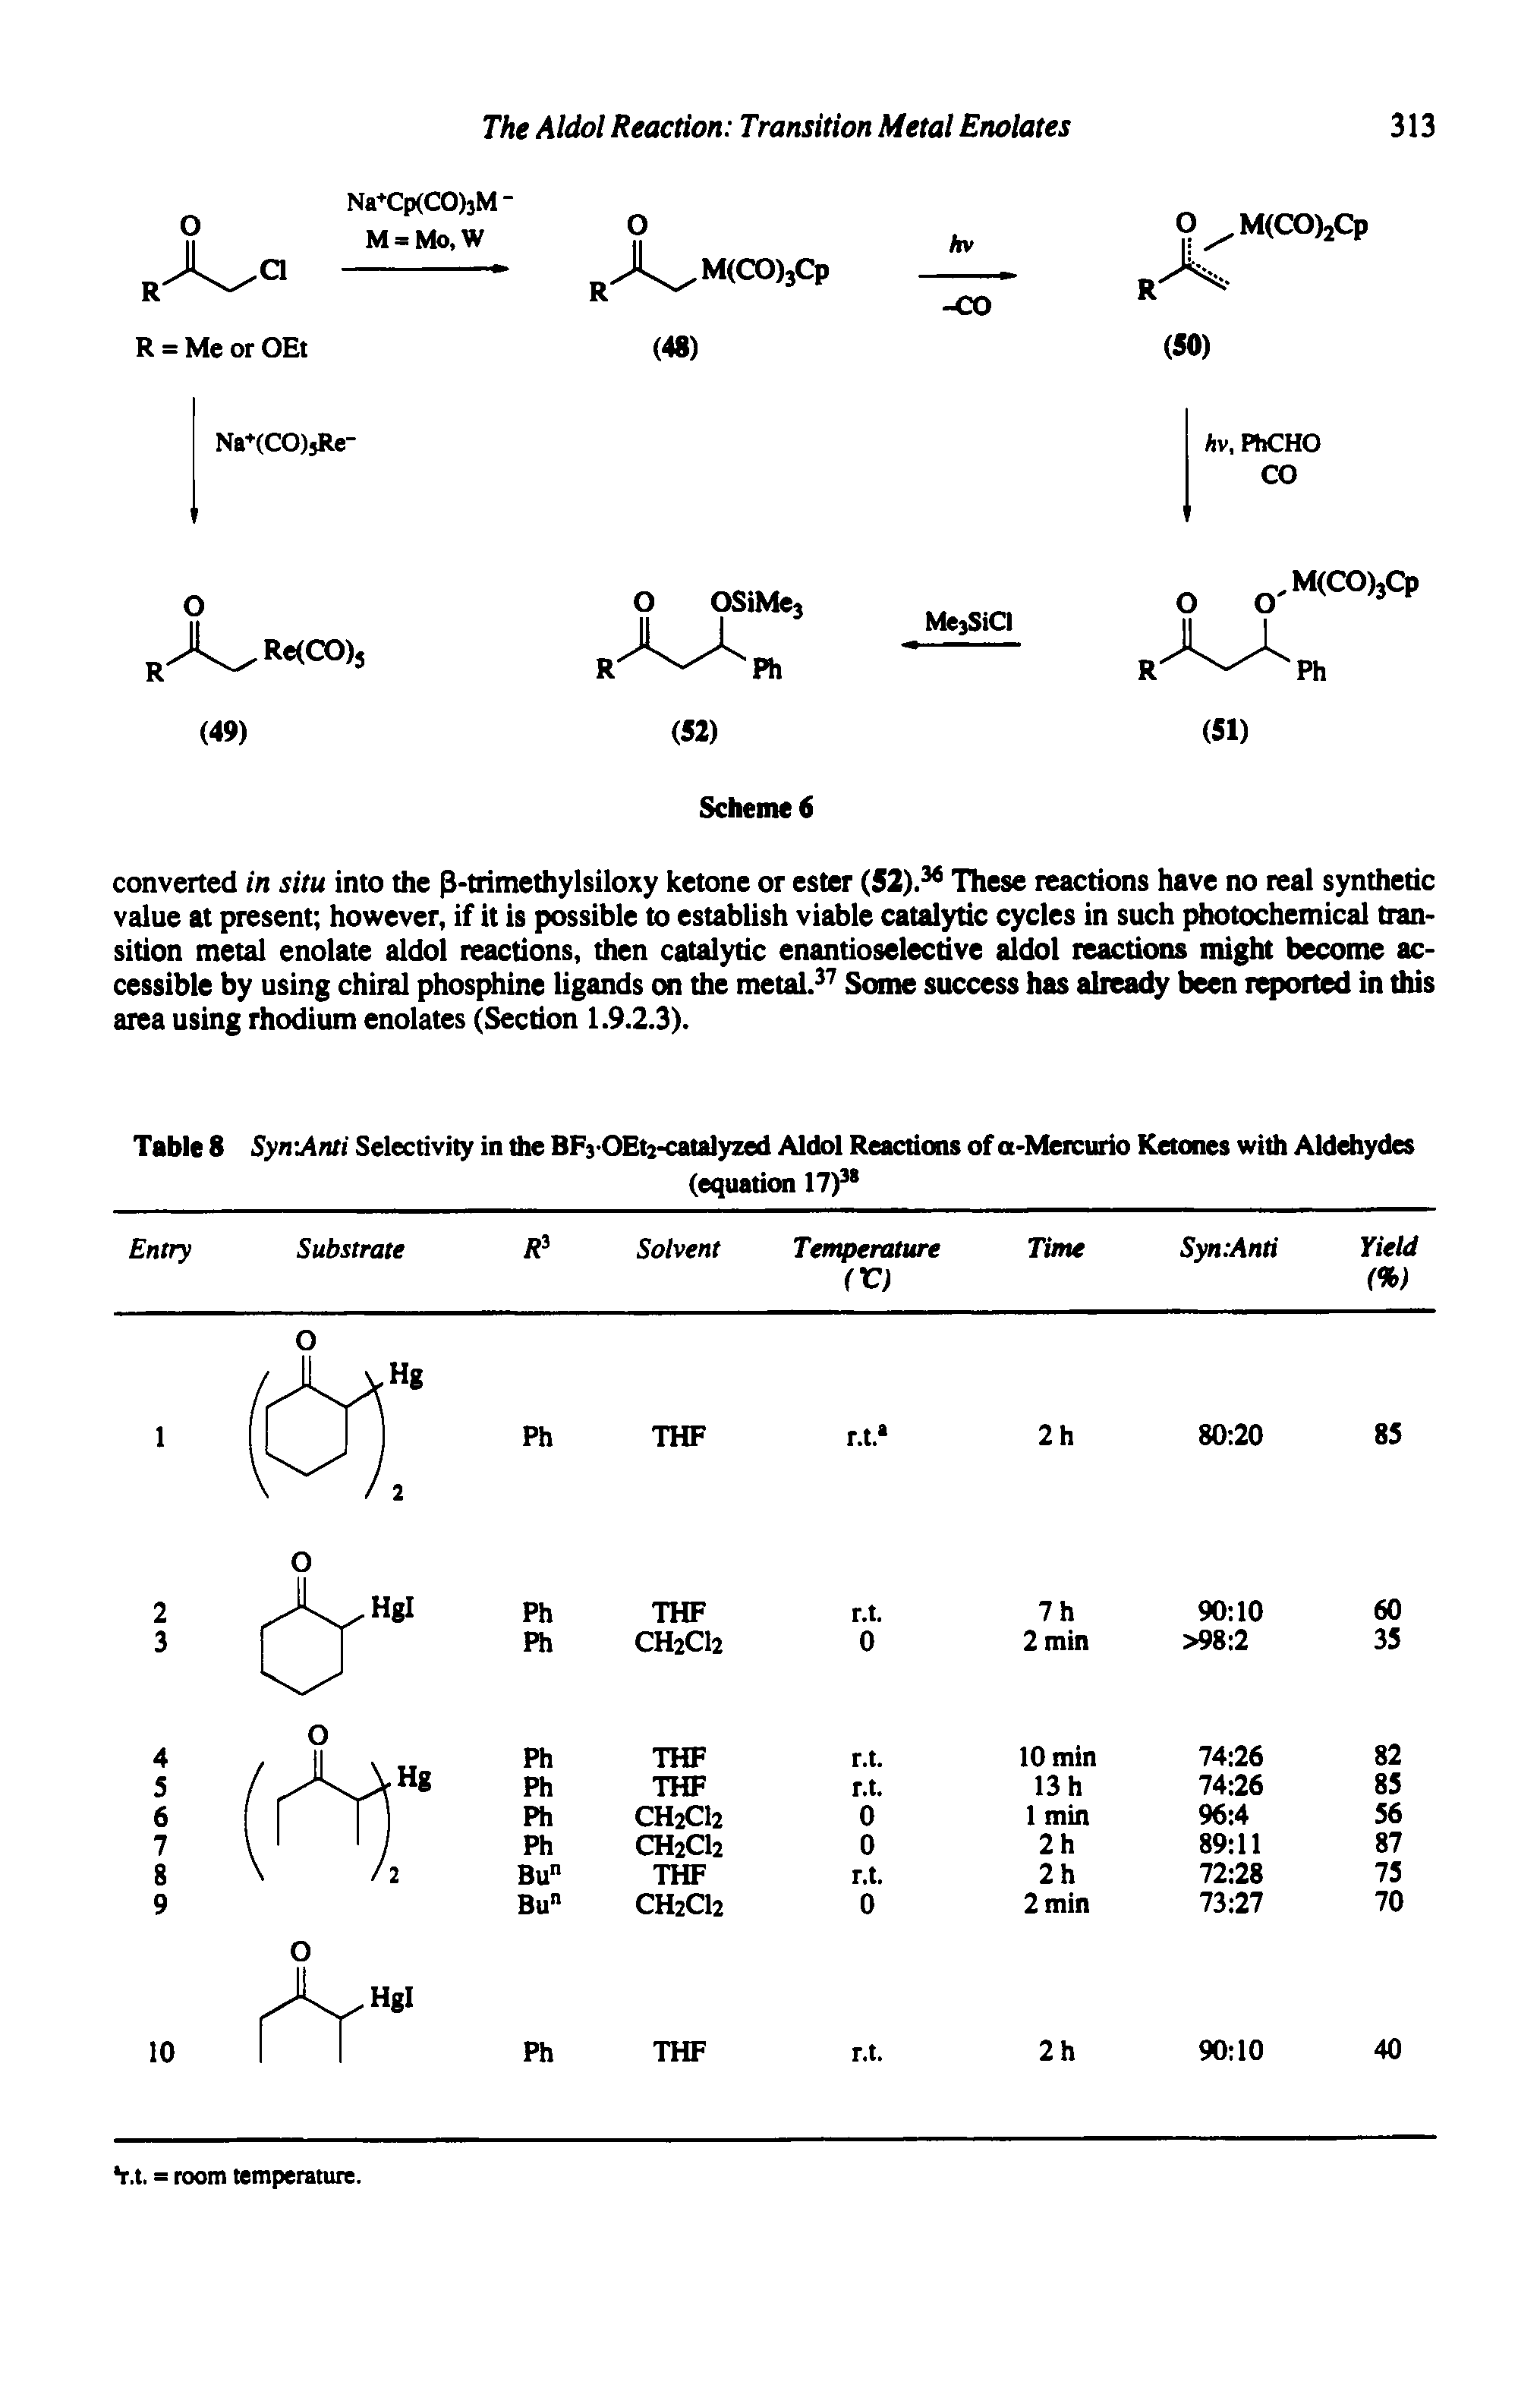 Table 8 SynxAnti Selectivity in the BFs OEtj-catalyzed Aldol Reactions of a-Mercurio Ketones with Aldehydes...